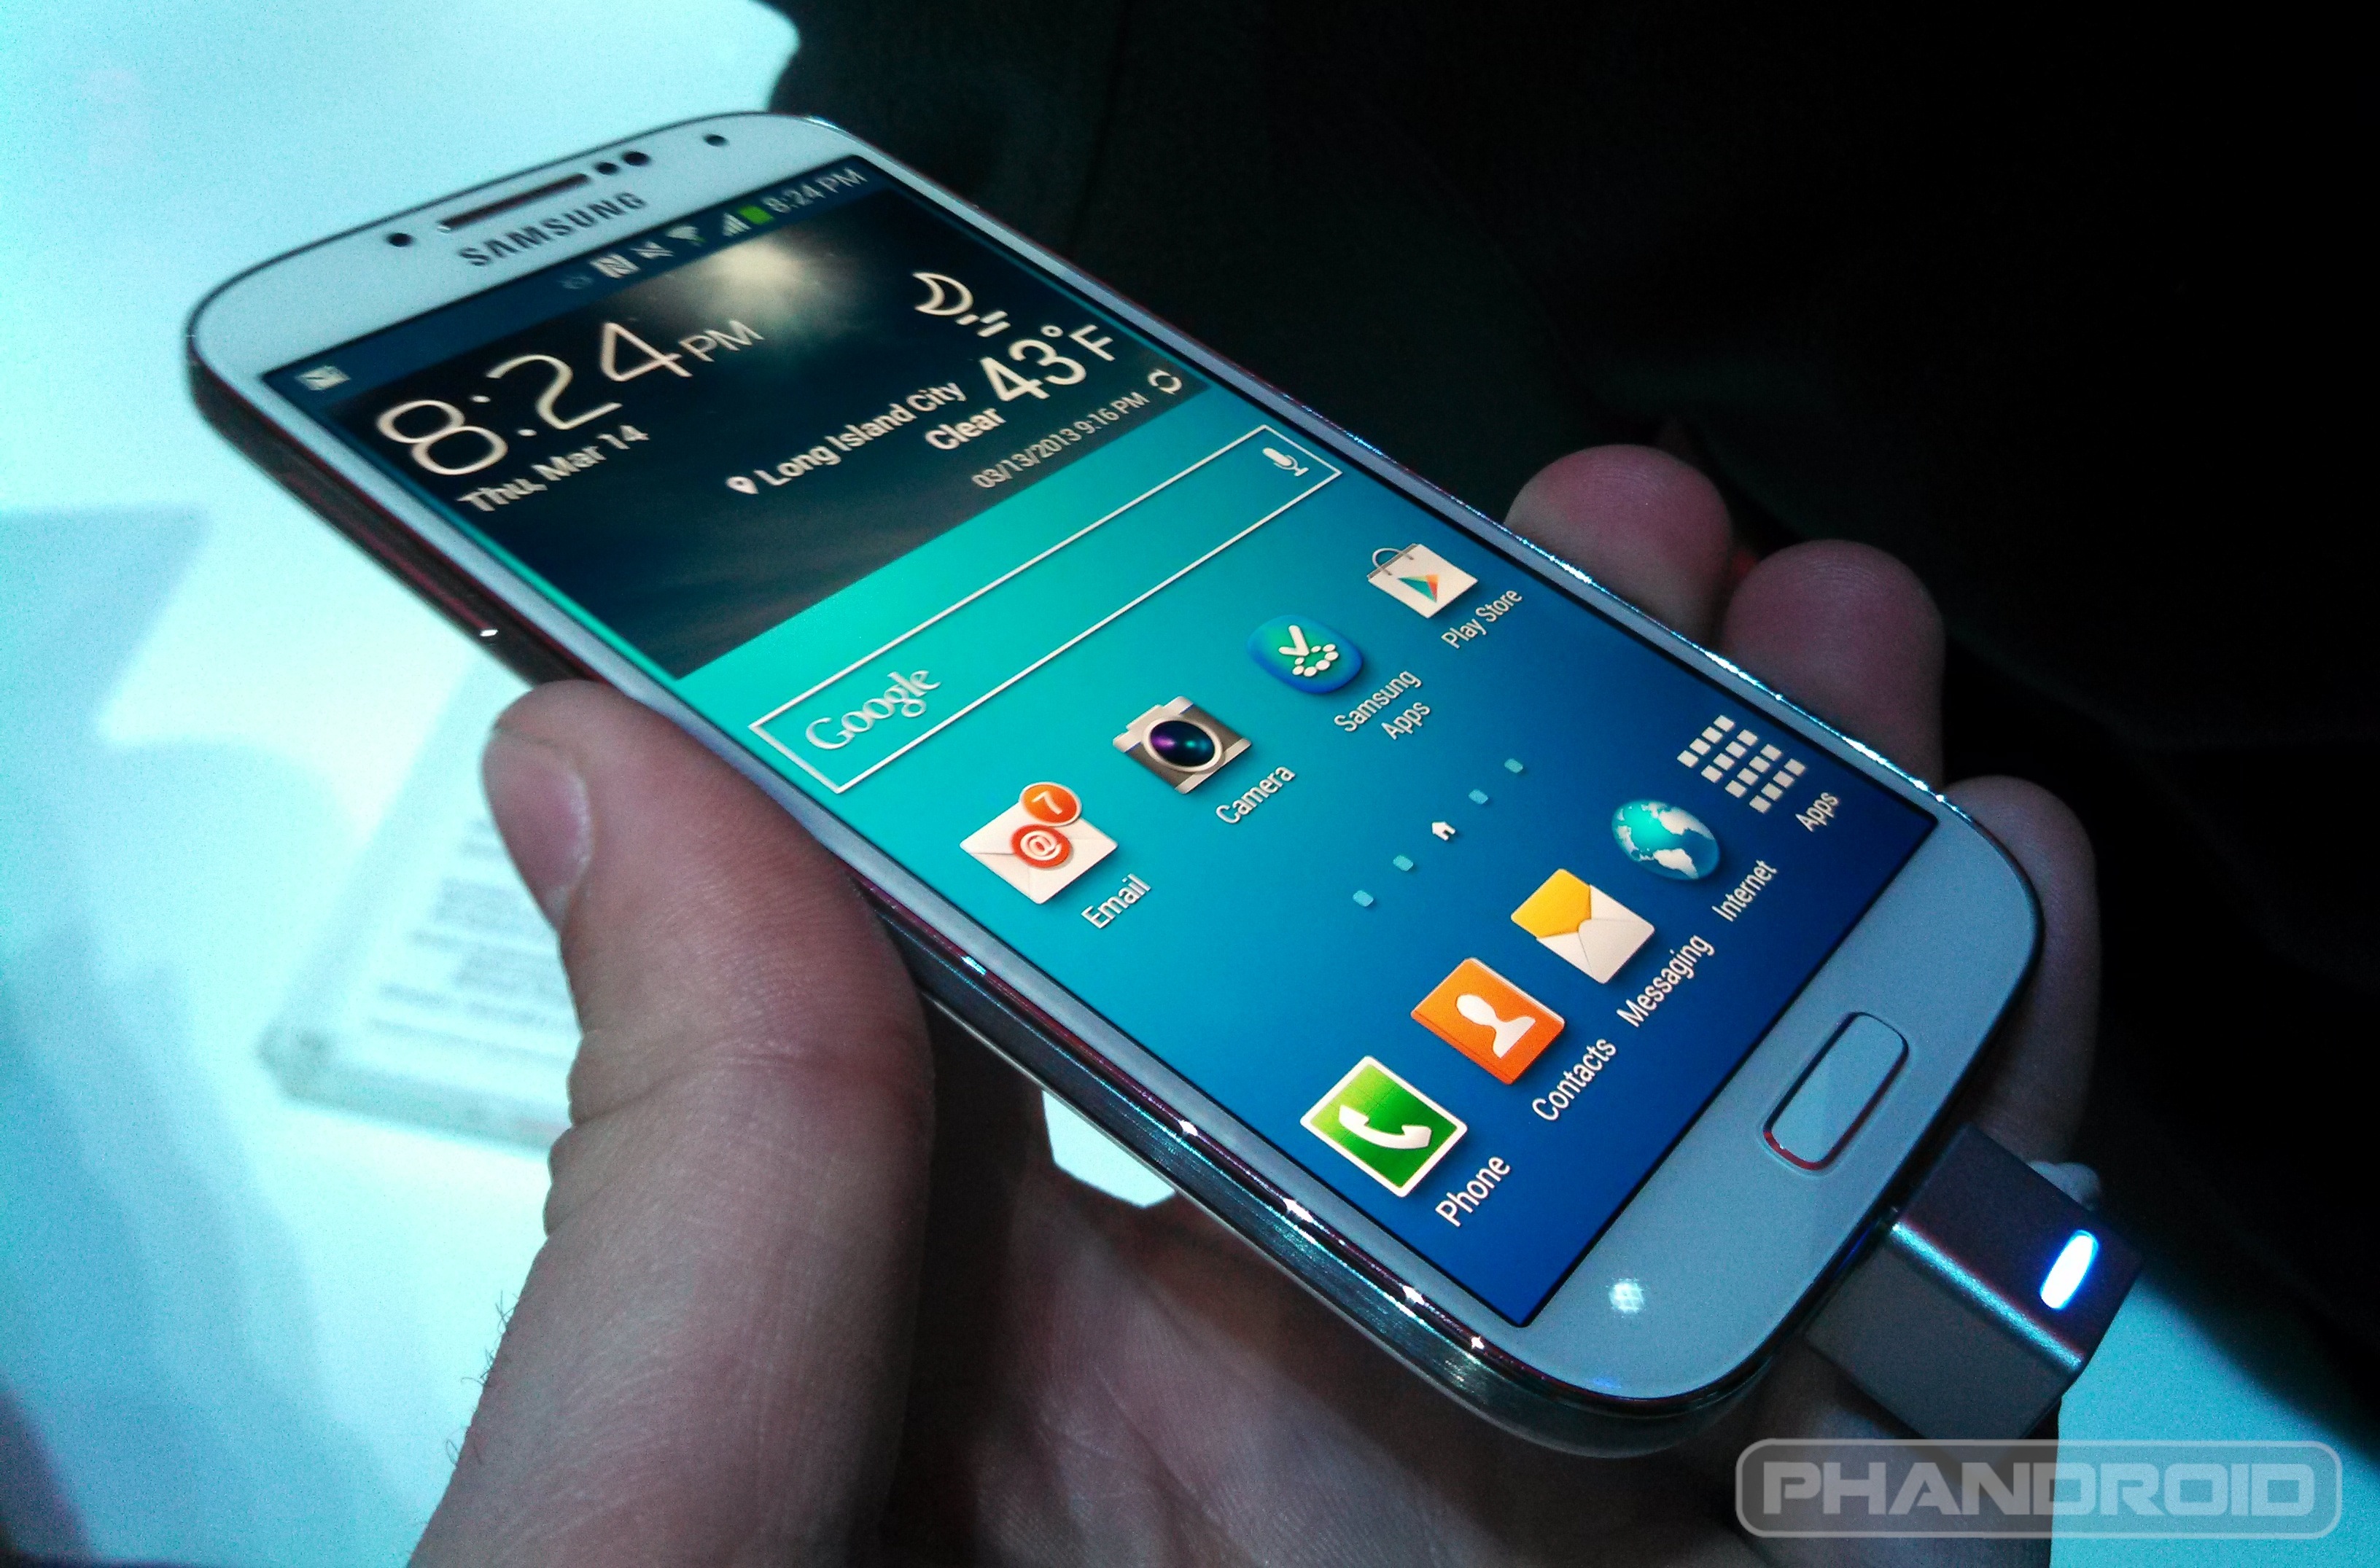 Samsung Galaxy S4 Unpacked Event Youtube